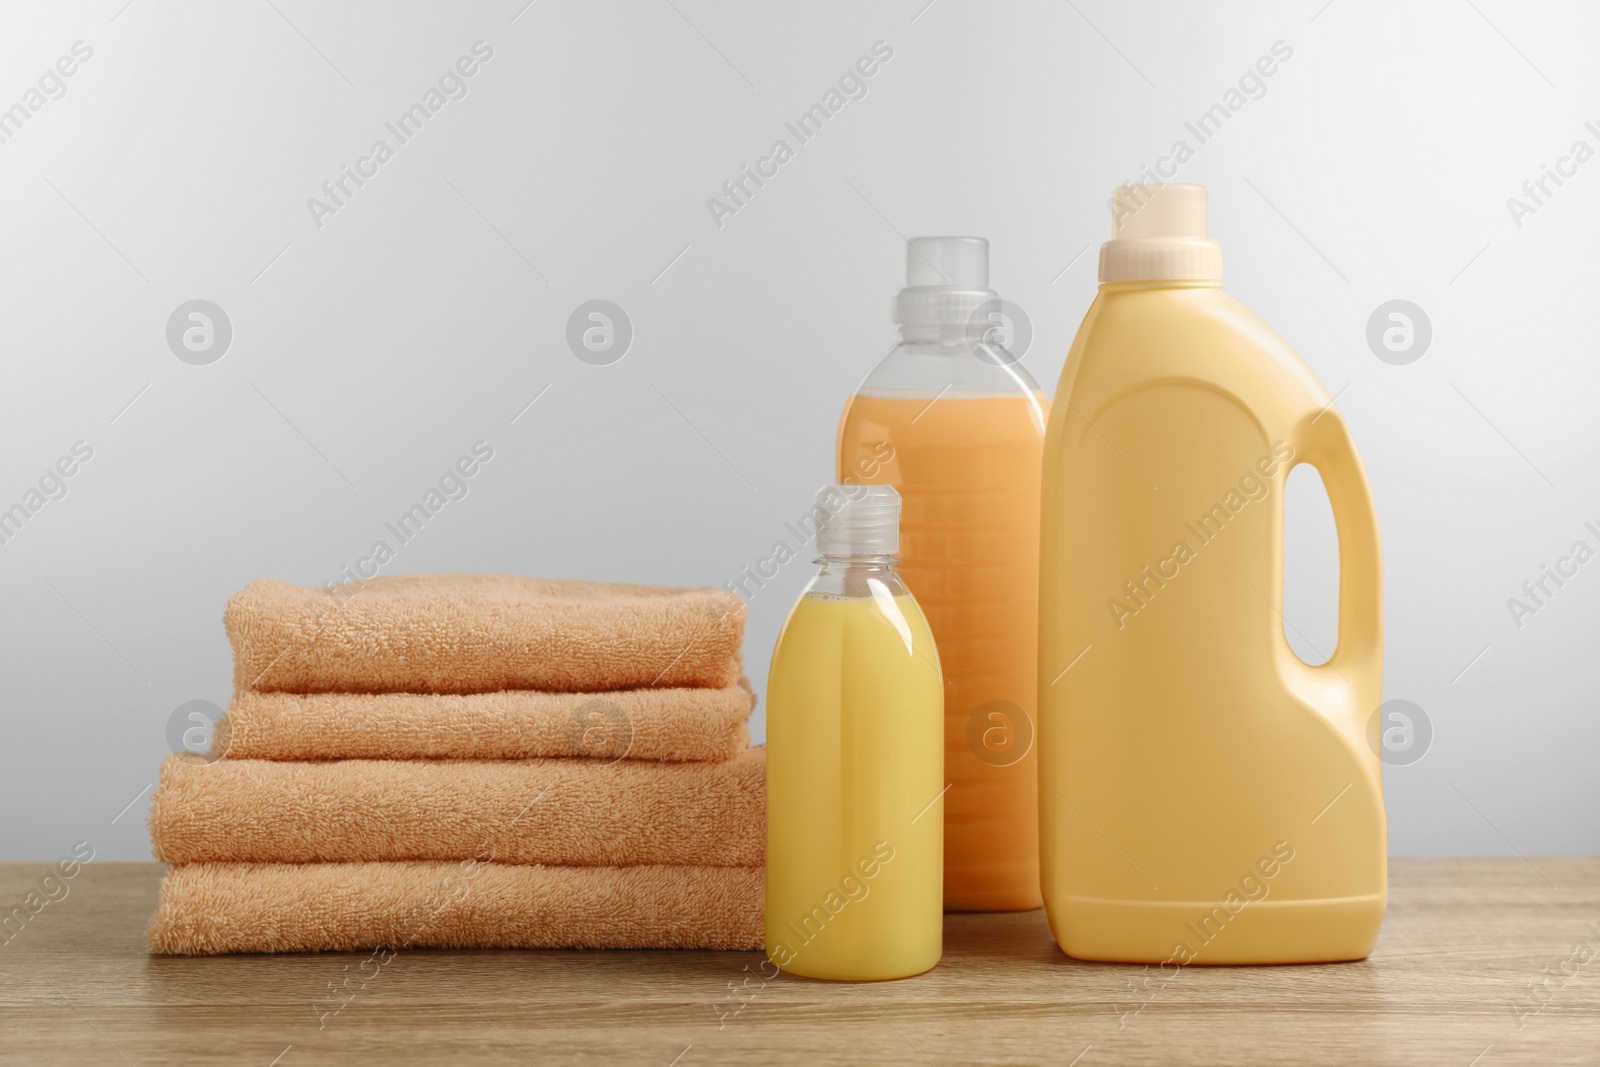 Photo of Bottles of laundry detergents and stacked fresh towels on table against white background